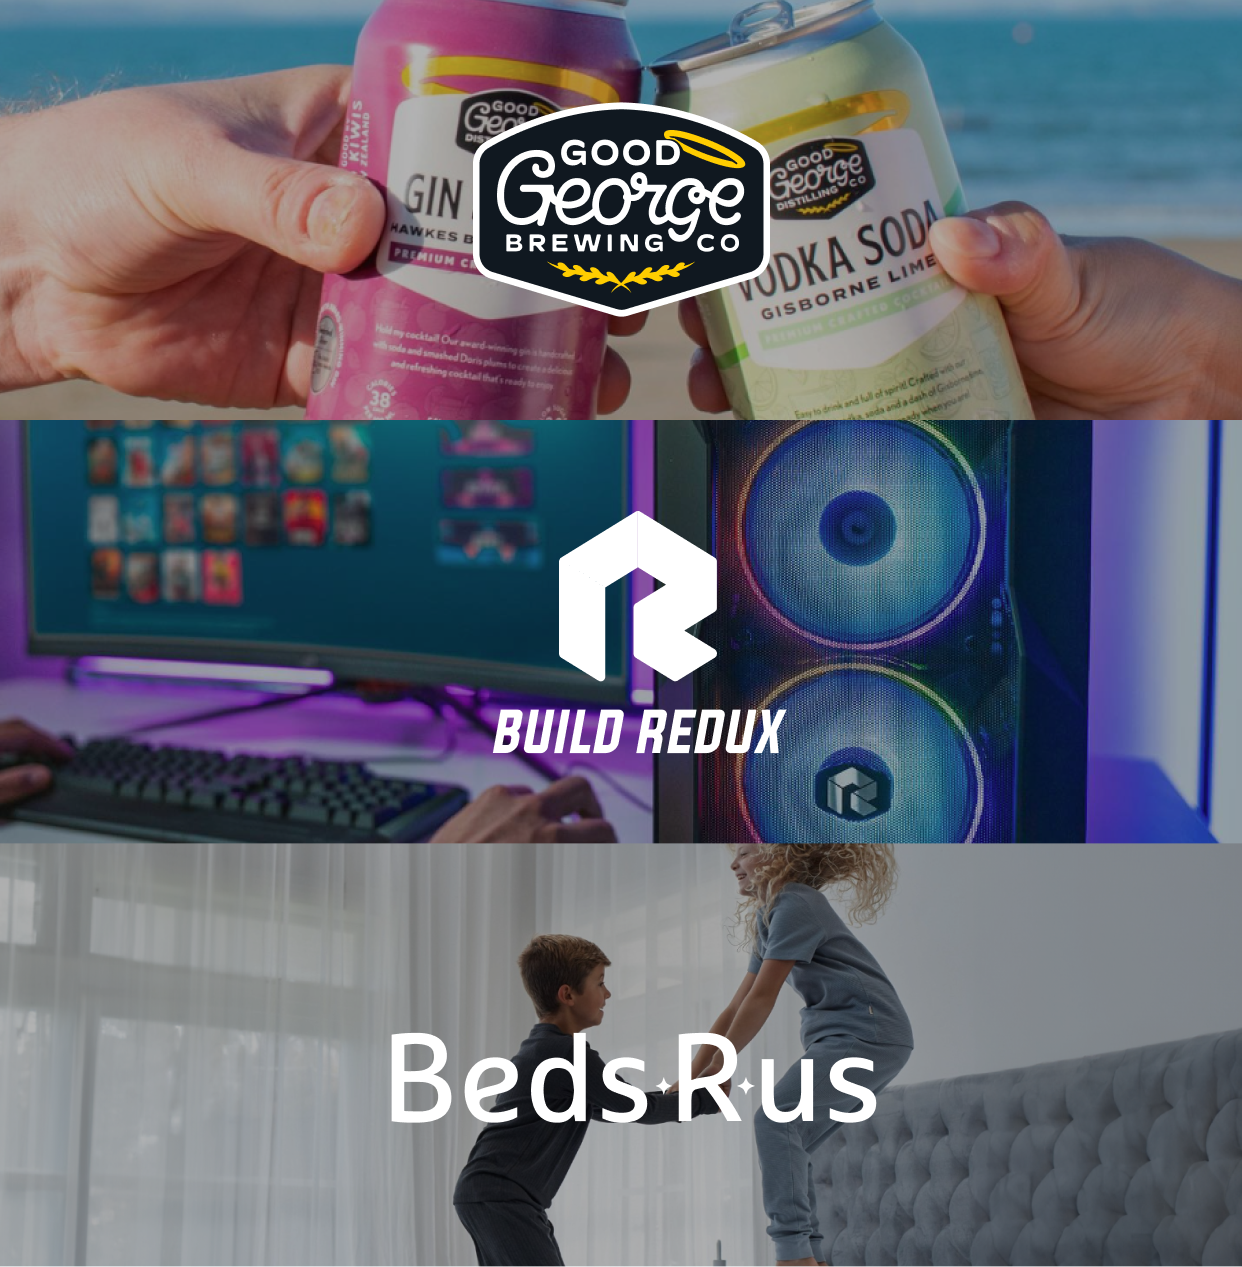 Good George build redux and BedsRus logo and backgrounds